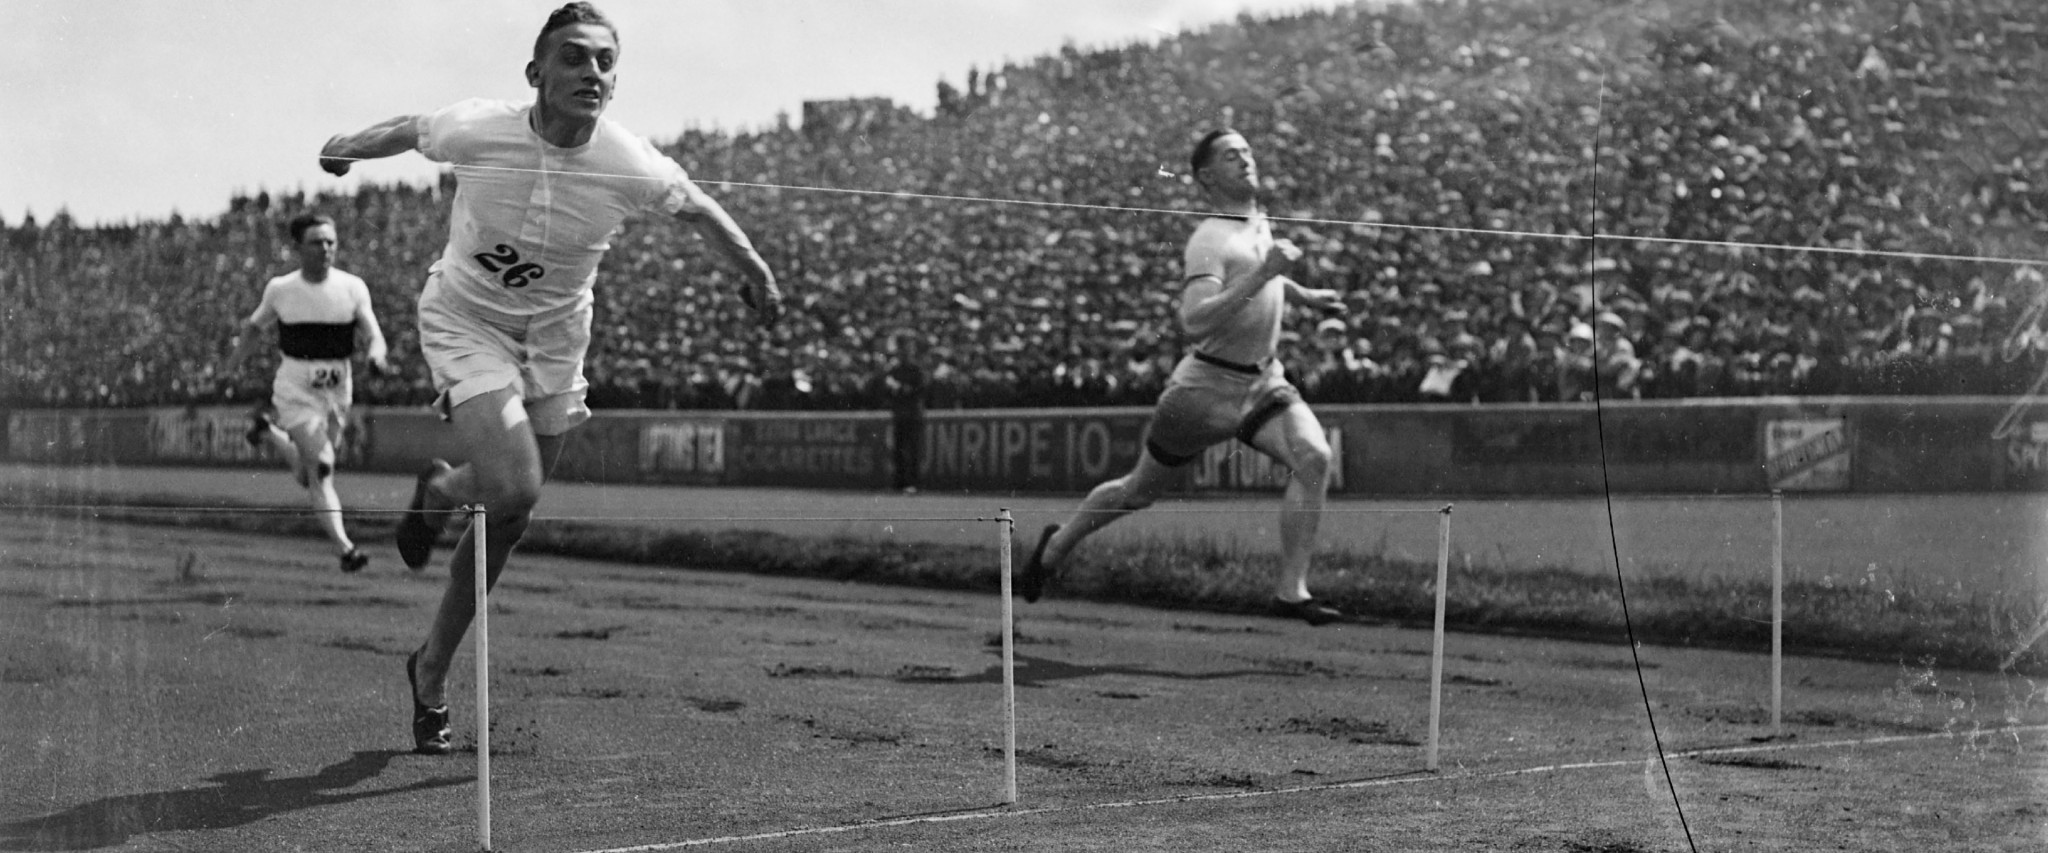 Stade de Colombes hosted athletics during the 1924 Olympic Games when Britain's Harold Abrahams won the 100m, a victory later immortalised in the film Chariots of Fire ©Getty Images